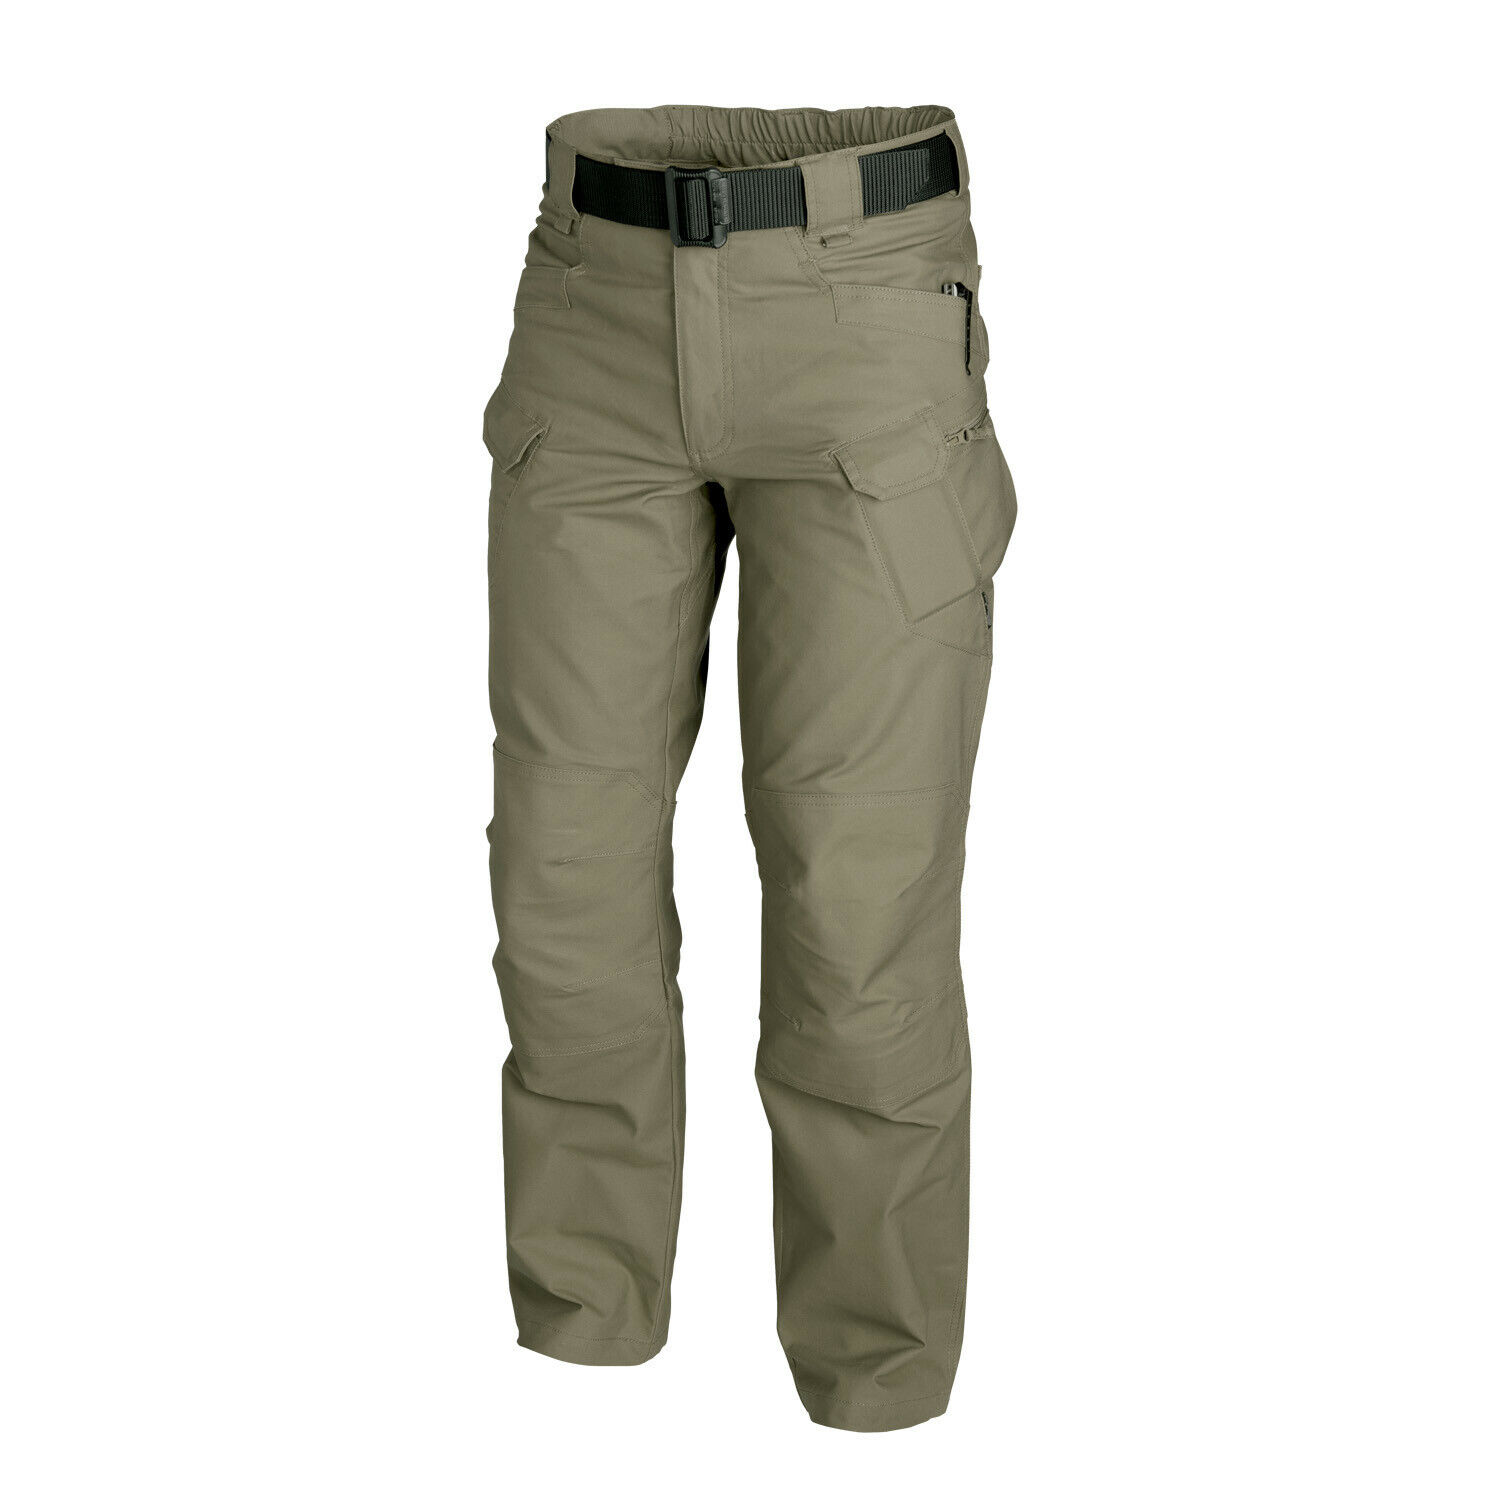 Urban Tactical Pants Helikon Tex UTP Mens Cargo Trousers Military Army RipStop